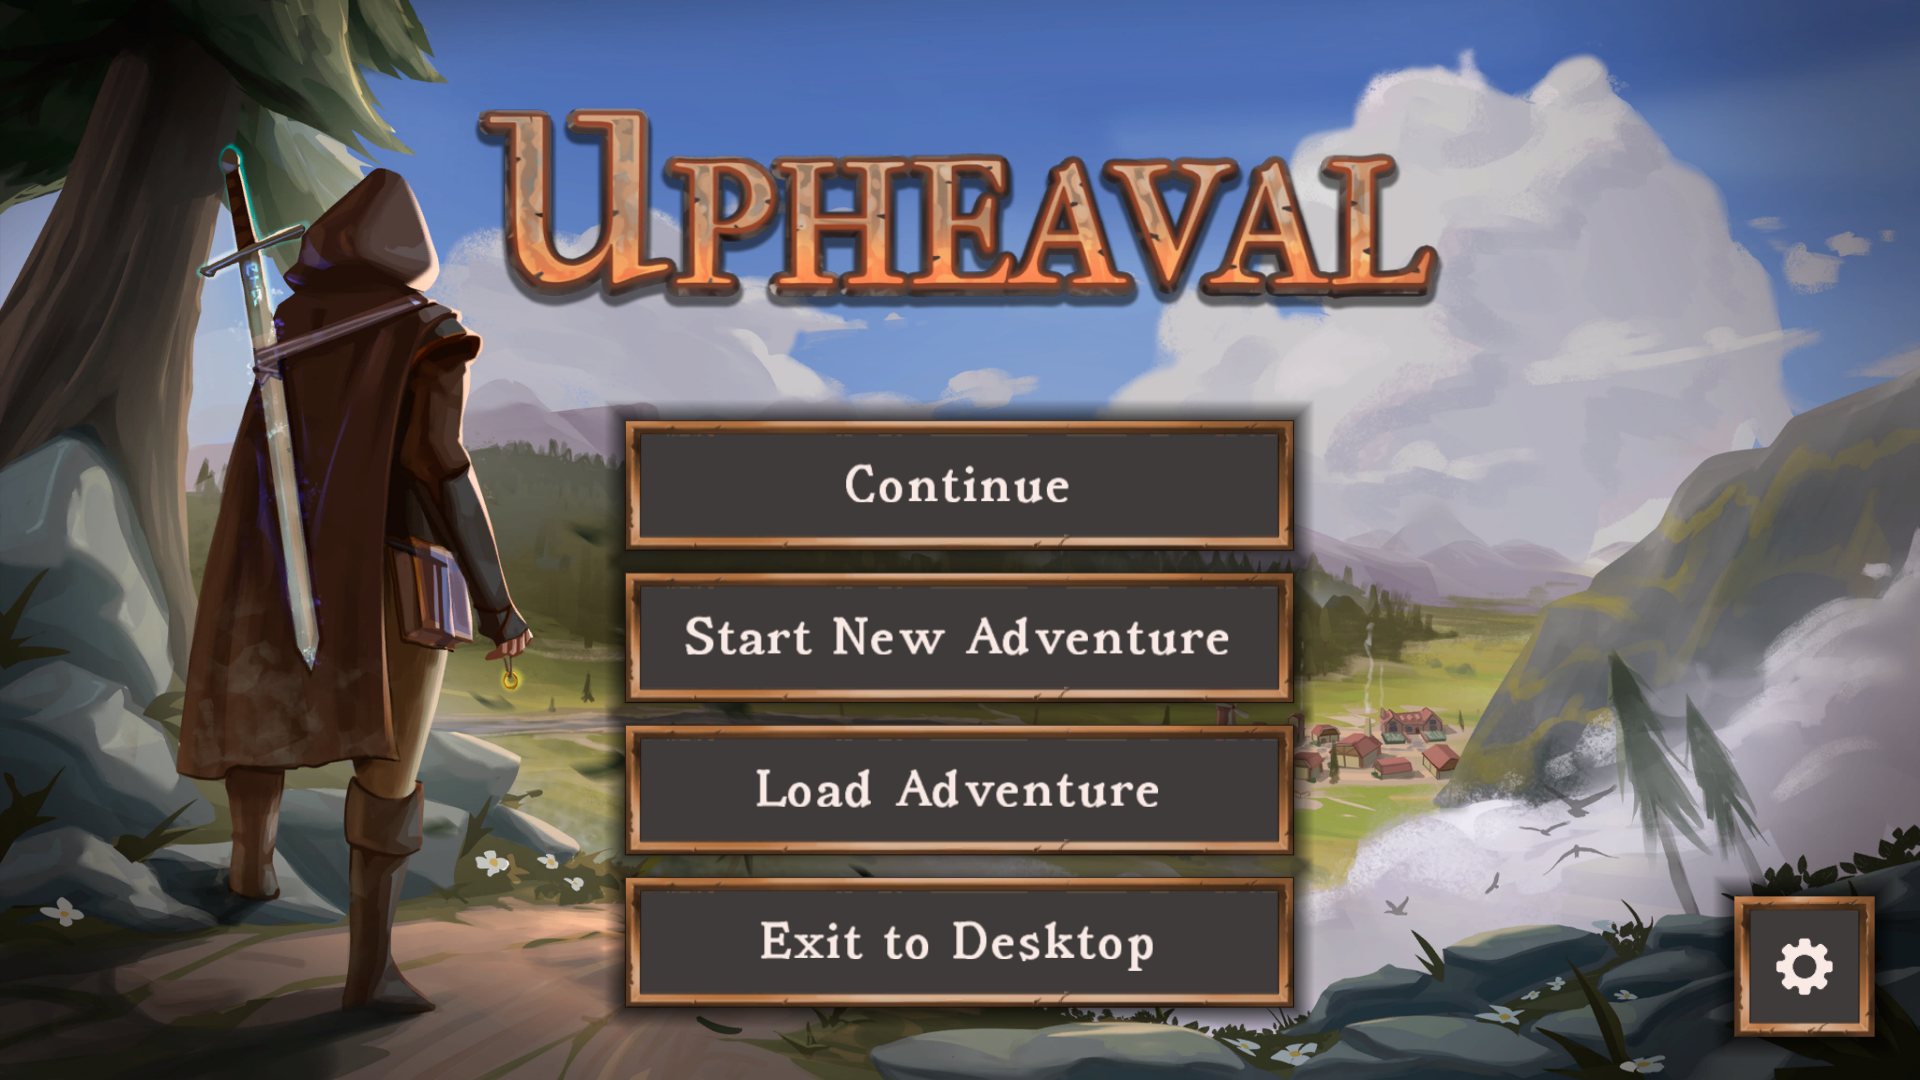 Screenshot of the new Upheaval main menu: The Upheaval cover art is in the background, but with a blue sky instead of a pink one. Buttons shown are “Continue,” “Start New Adventure,” “Load Adventure,” “Exit to Desktop,” and a “Setting” button with a gear icon on it.